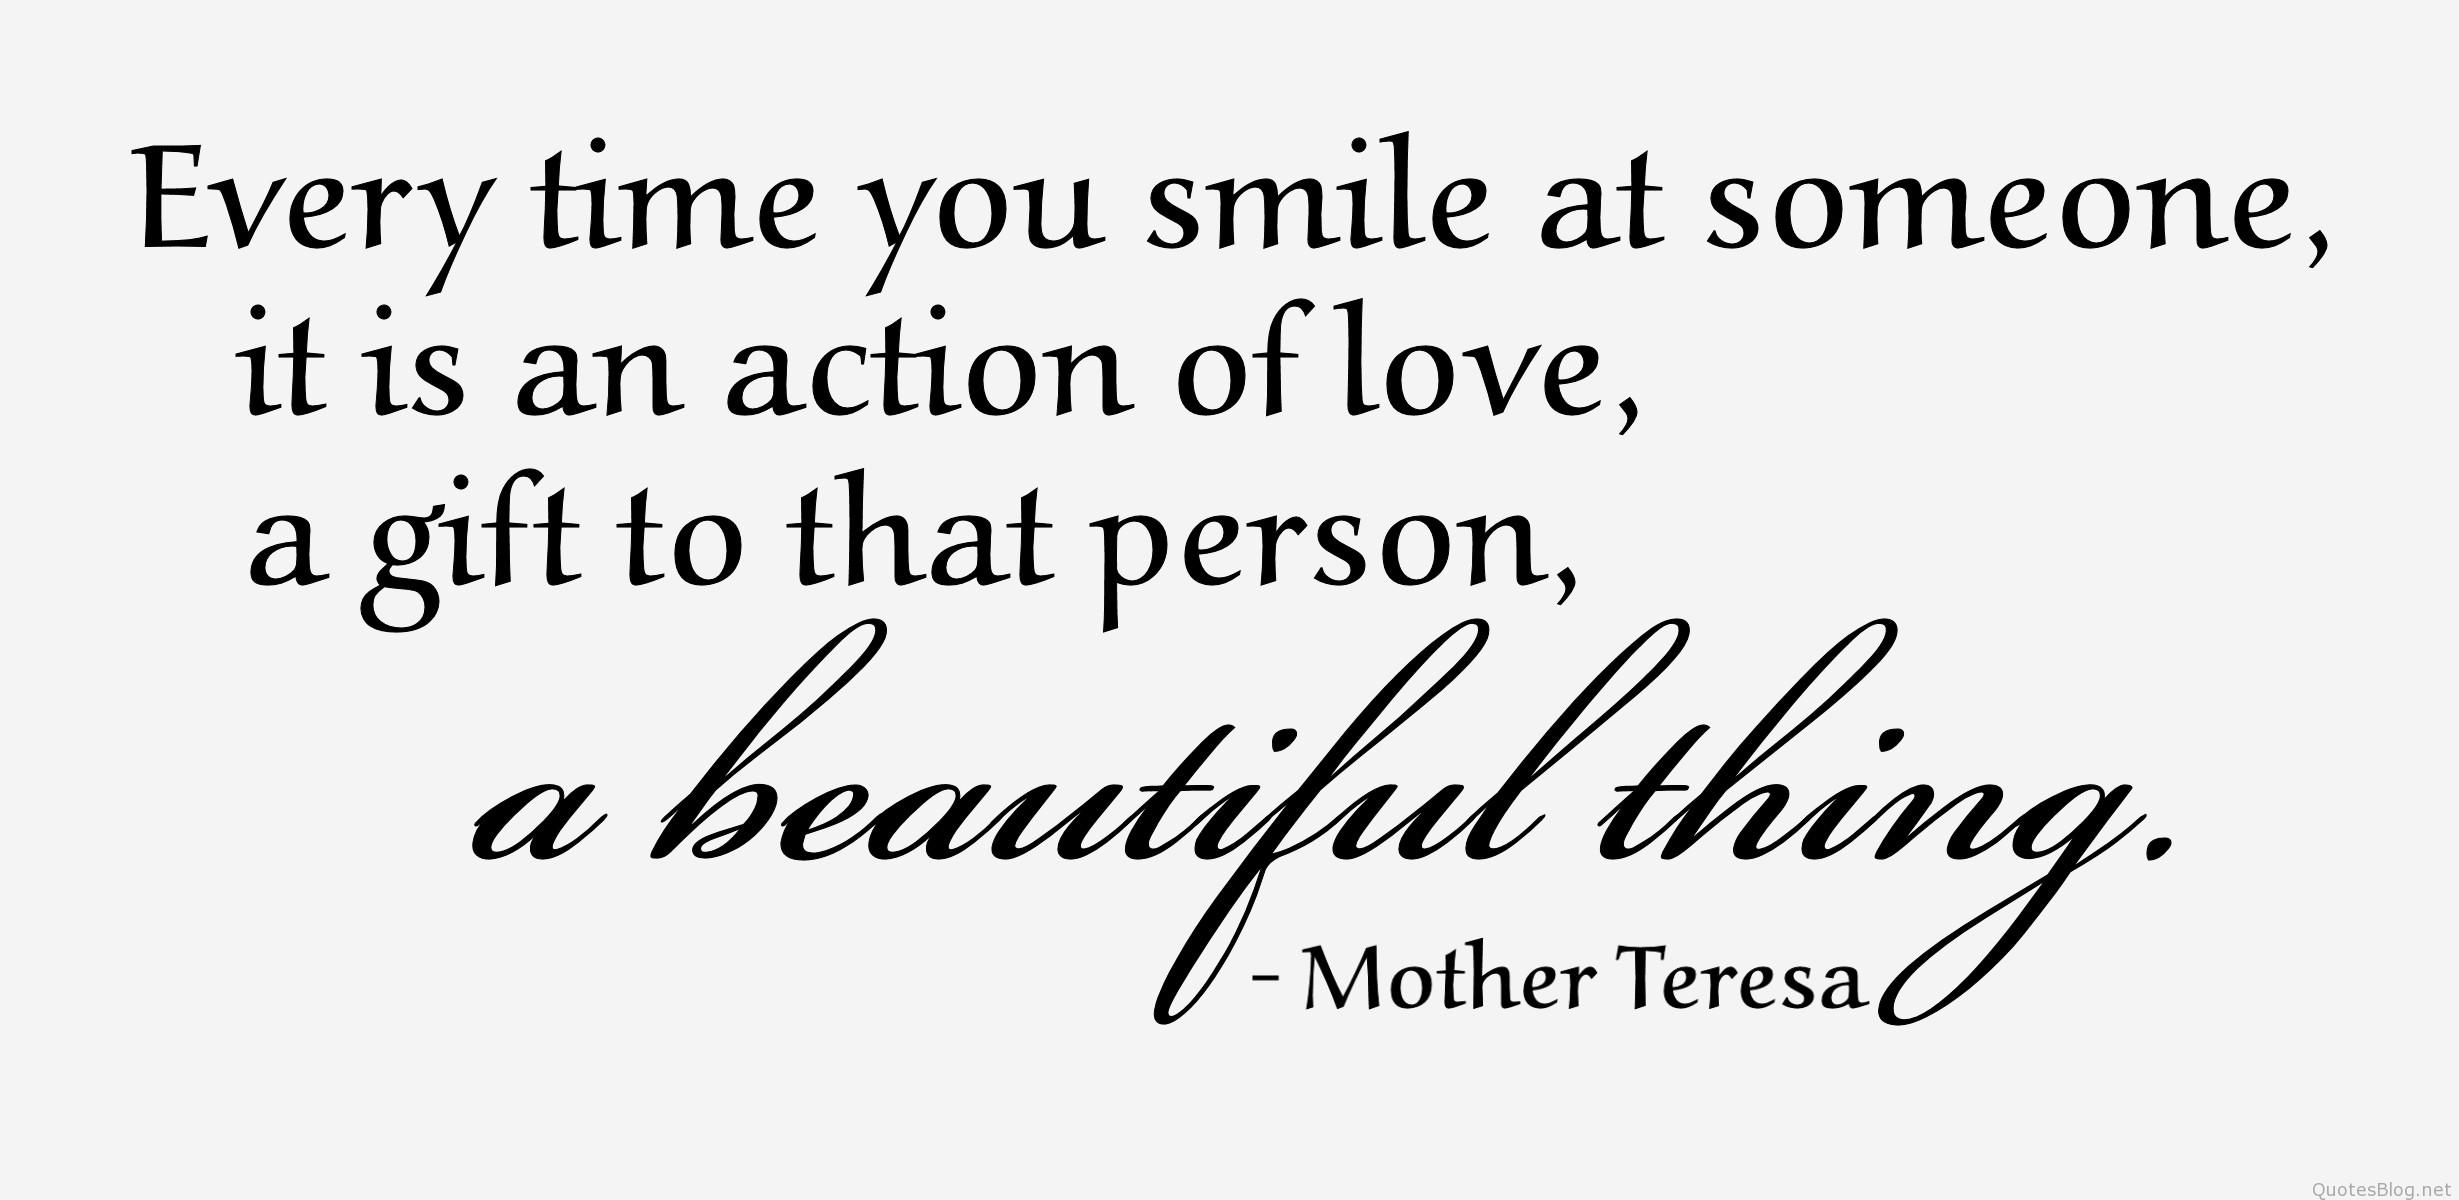 Mother Teresa Smile Quotes
 Best Mother Theresa Quotes and Wise messages